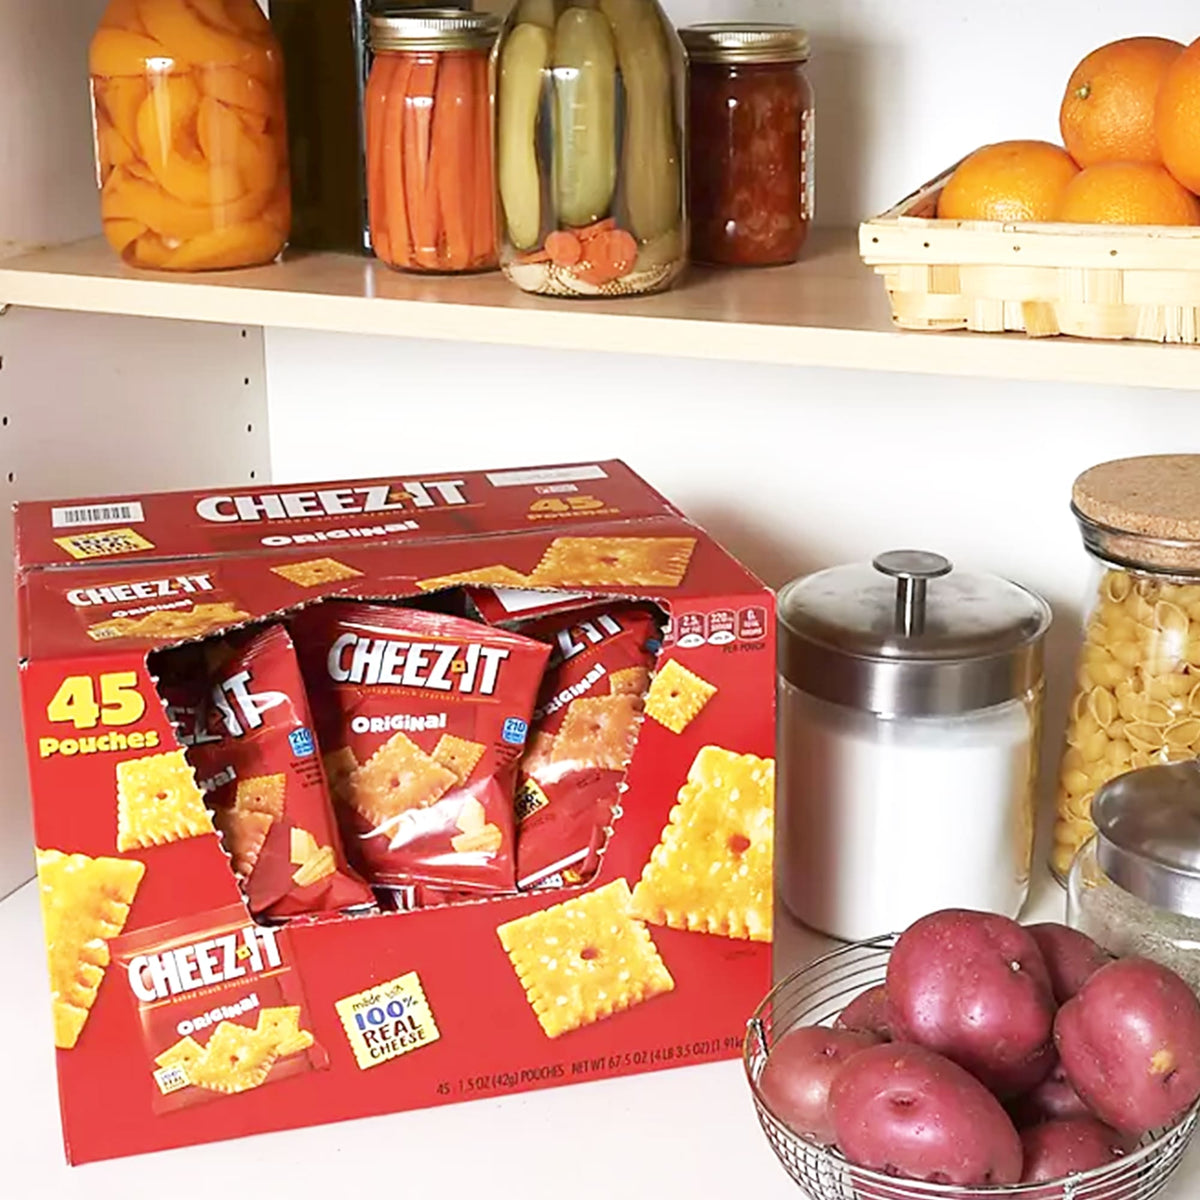 Cheez-It Original Baked Snack Crackers Individual Pouches, 45 ct.